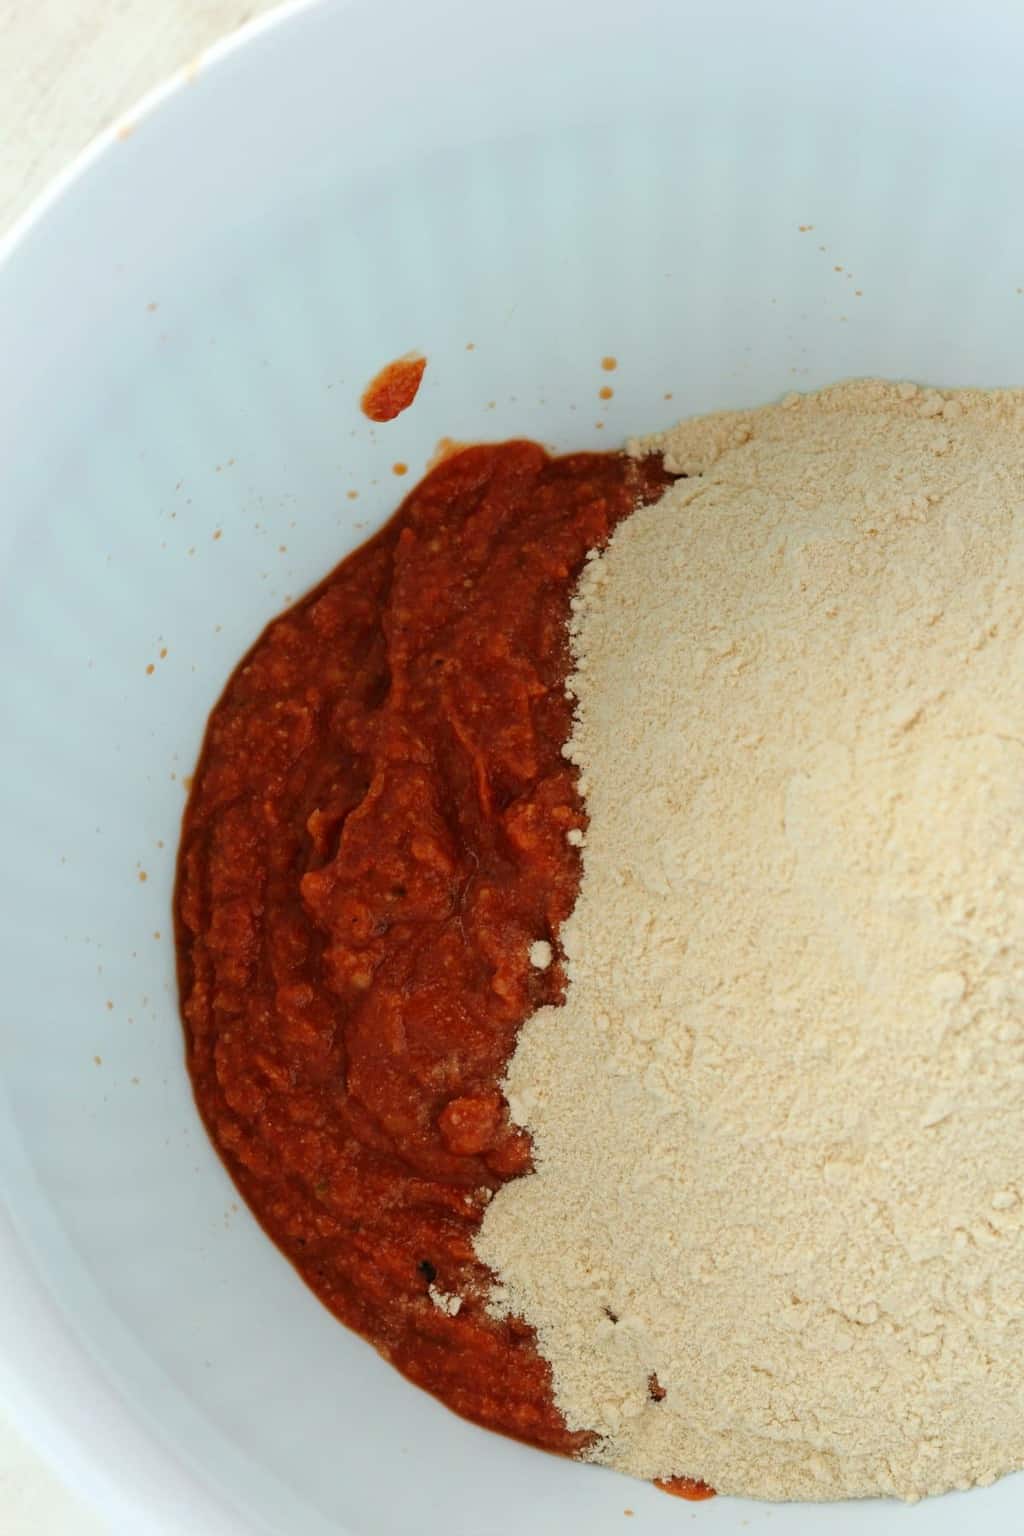 Vital wheat gluten powder and other ingredients in a mixing bowl - making seitan for vegan shawarmas.